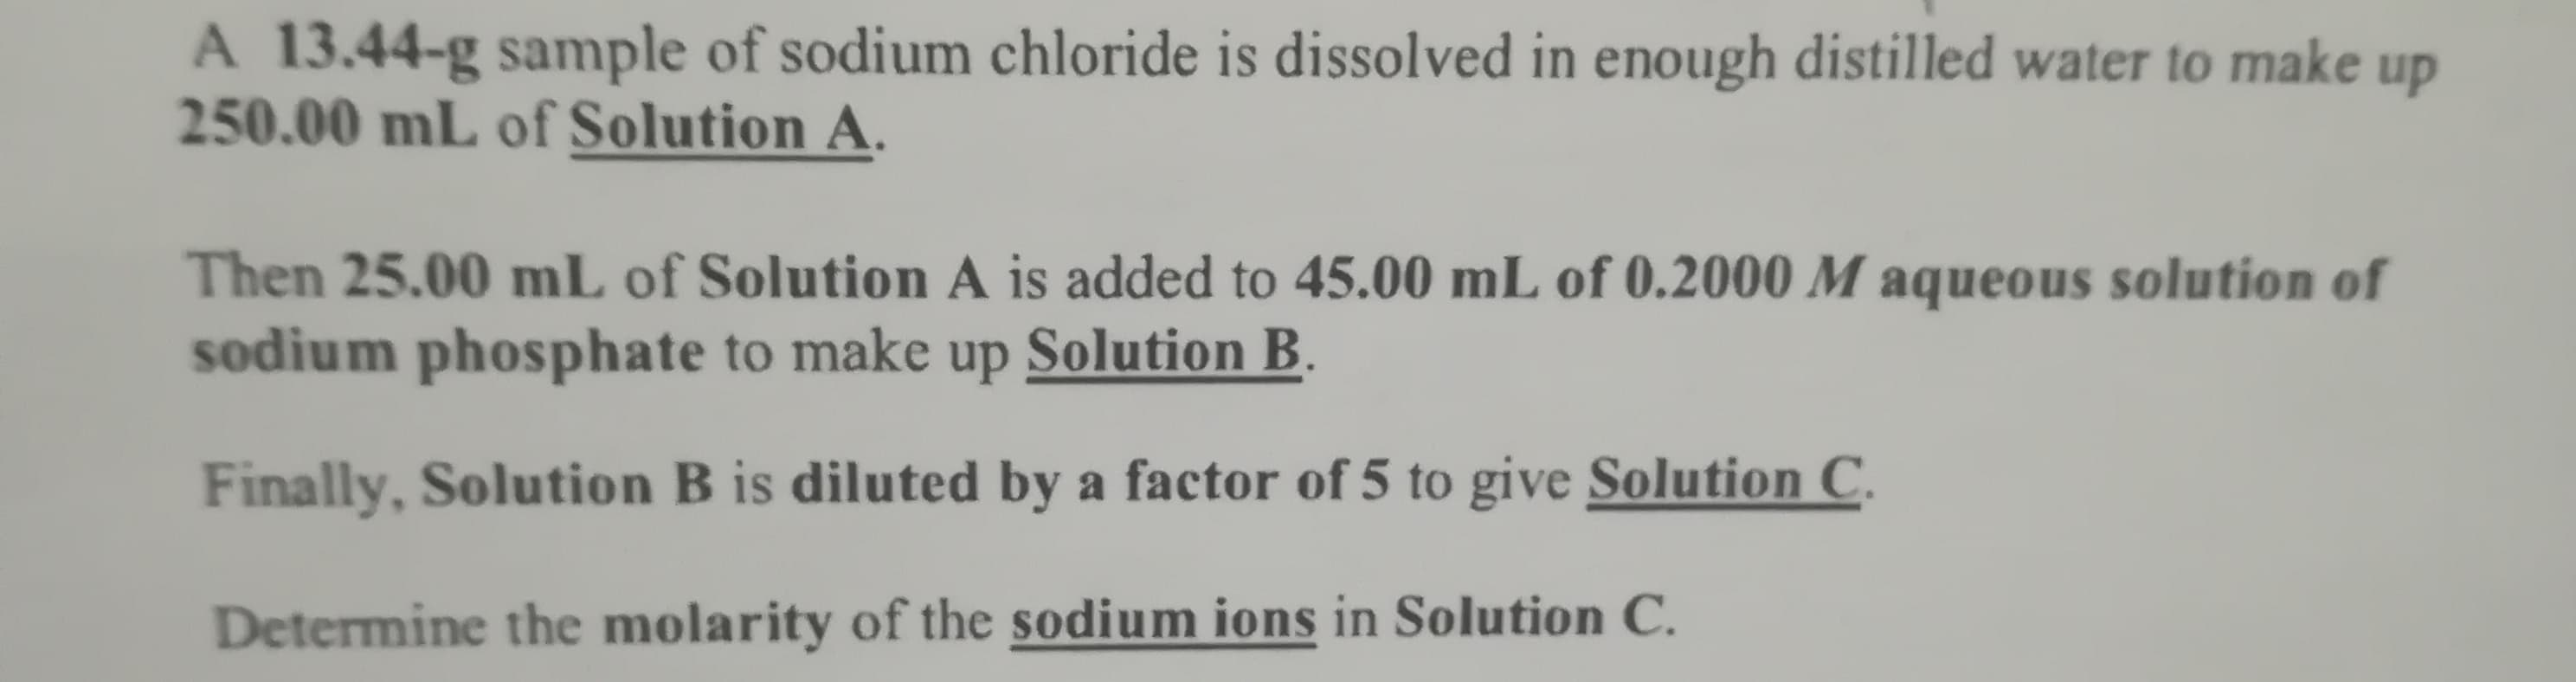 A 13.44-g sample of sodium chloride is dissolved in enough distilled water to make up
250.00 mL of Solution A.
Then 25.00 mL of Solution A is added to 45.00 mL of 0.2000 M aqueous solution of
sodium phosphate to make up Solution B.
Finally, Solution B is diluted by a factor of 5 to give Solution C.
Determine the molarity of the sodium ions in Solution C.
